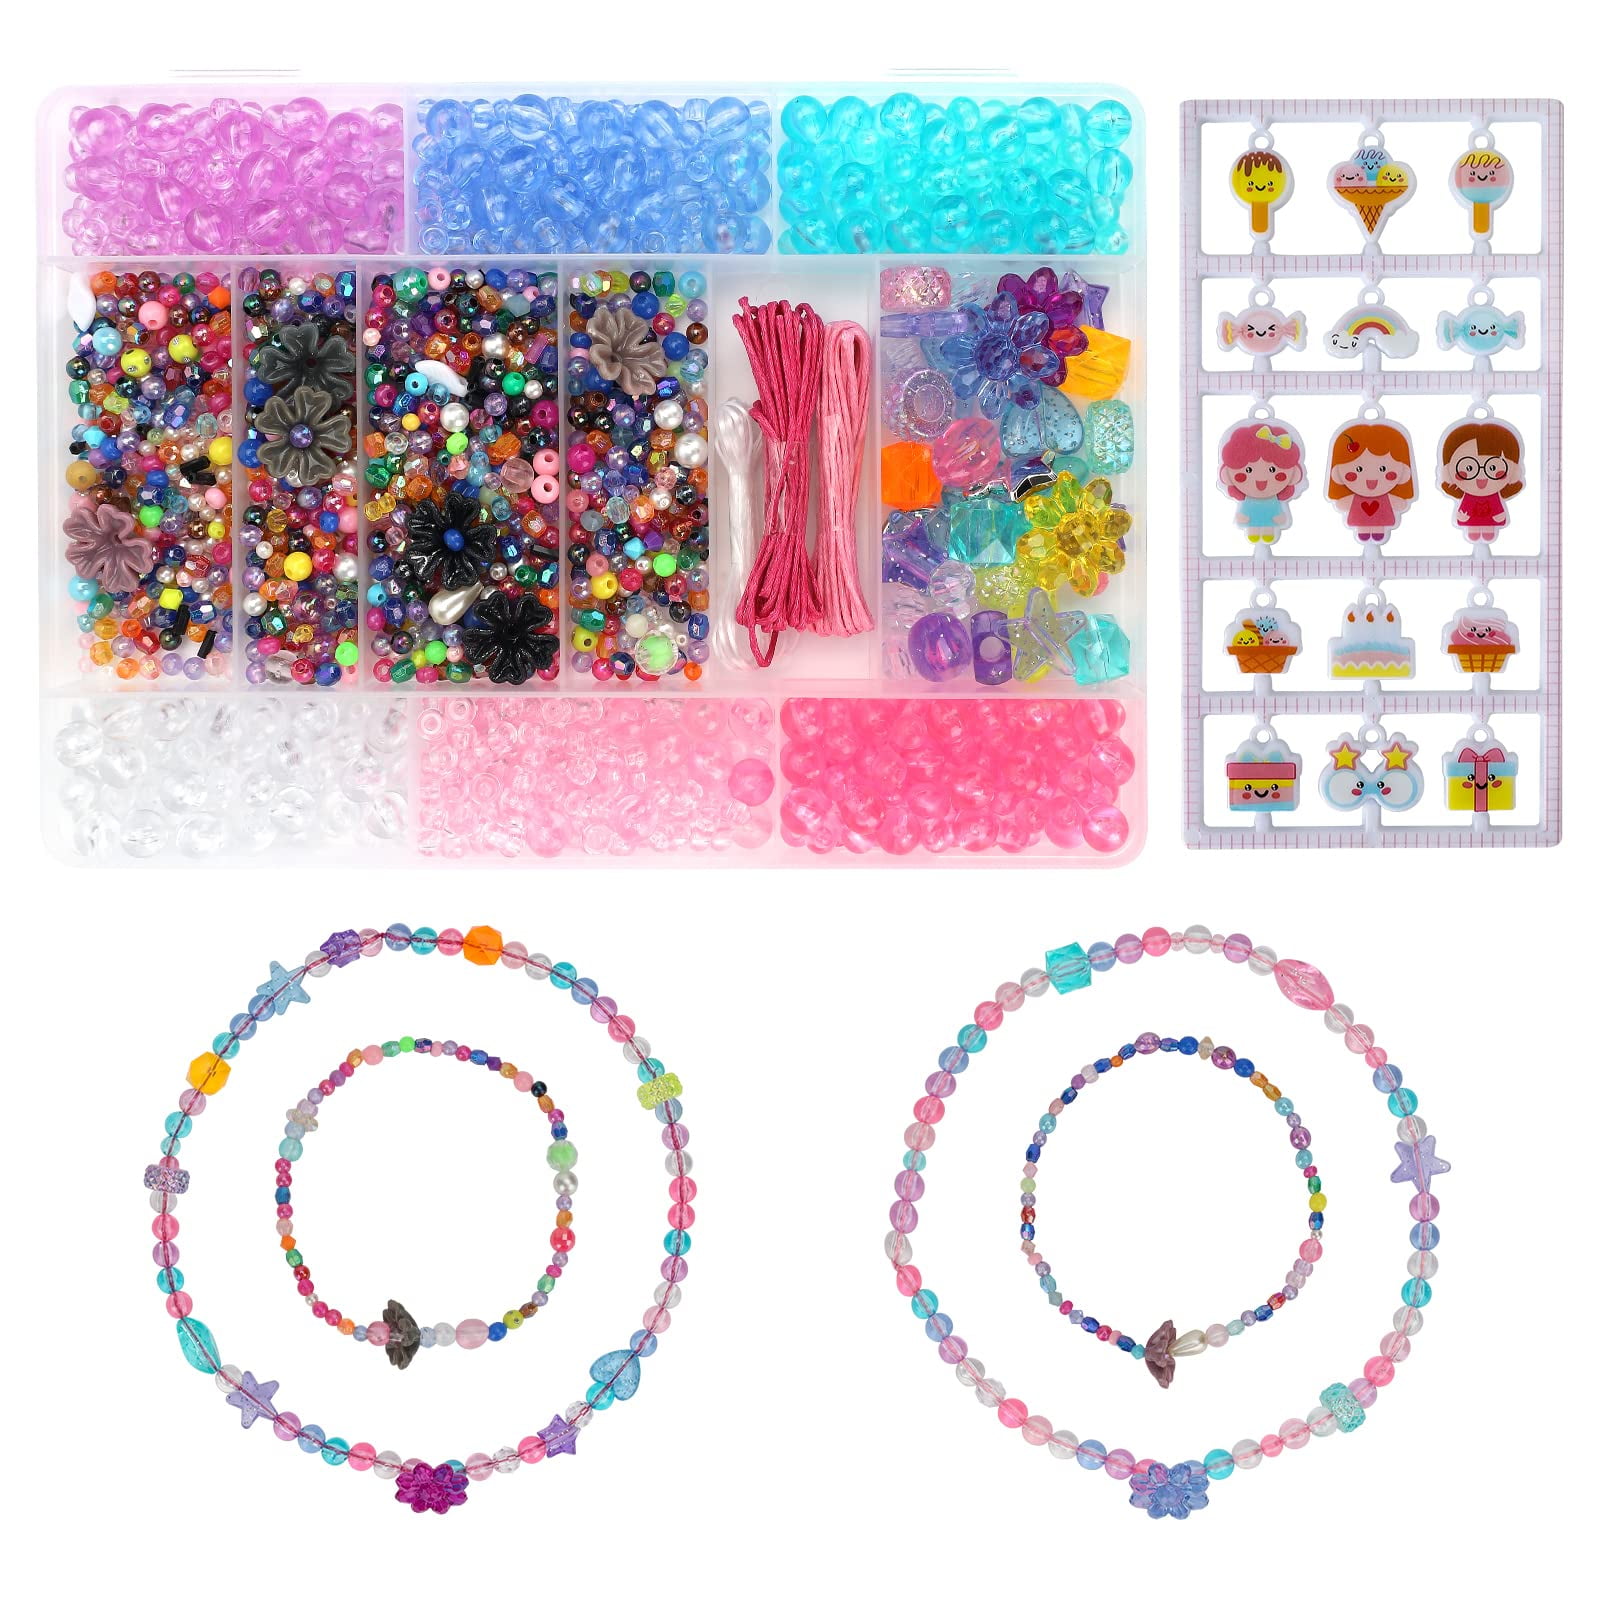 SYGA Beads for Kids Crafts Children's Jewelry Making Kit DIY Bracelets  Necklace Hairband and Rings Craft Kits Birthday for 4, 5, 6, 7-Year-Old  Little Girls-Multicolor(QL-00016) - Beads for Kids Crafts Children's Jewelry